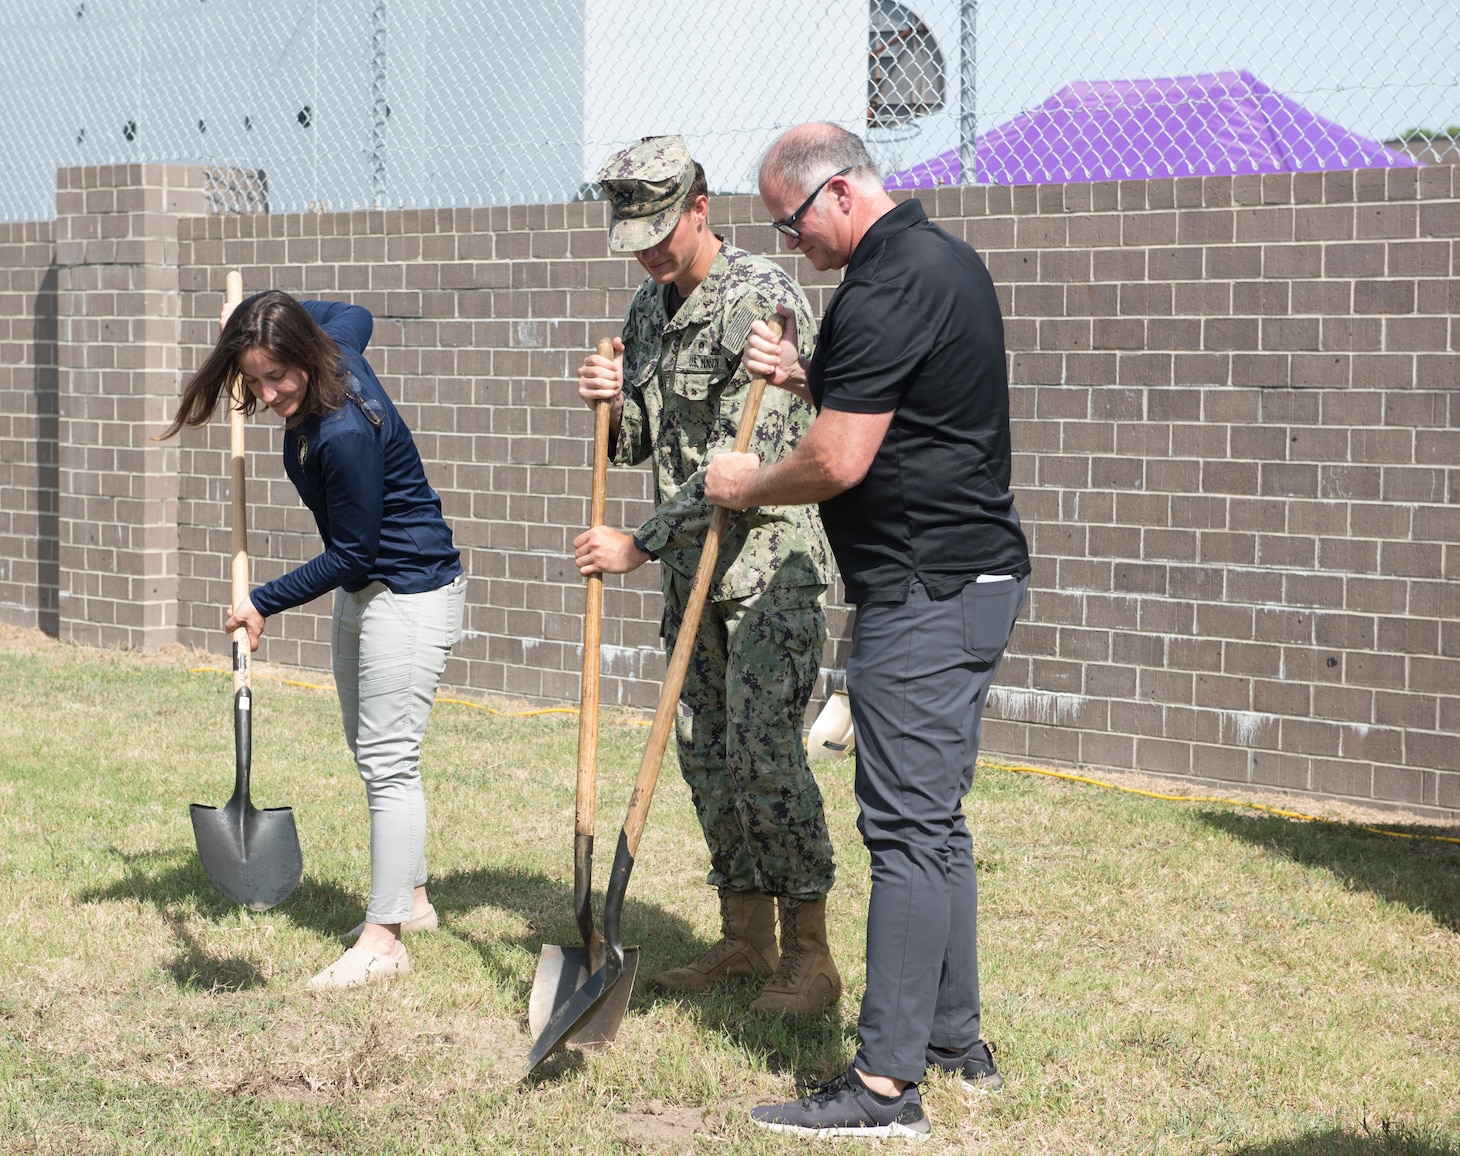 Suzanna Fisher, executive director at Navy Special Operations Foundation, Navy Diver Seaman Chris Pedrini, and Henry Thrift, president of Navy Explosive Ordnance Disposal Association, dig during the groundbreaking ceremony for the Navy Special Operations Memorial.